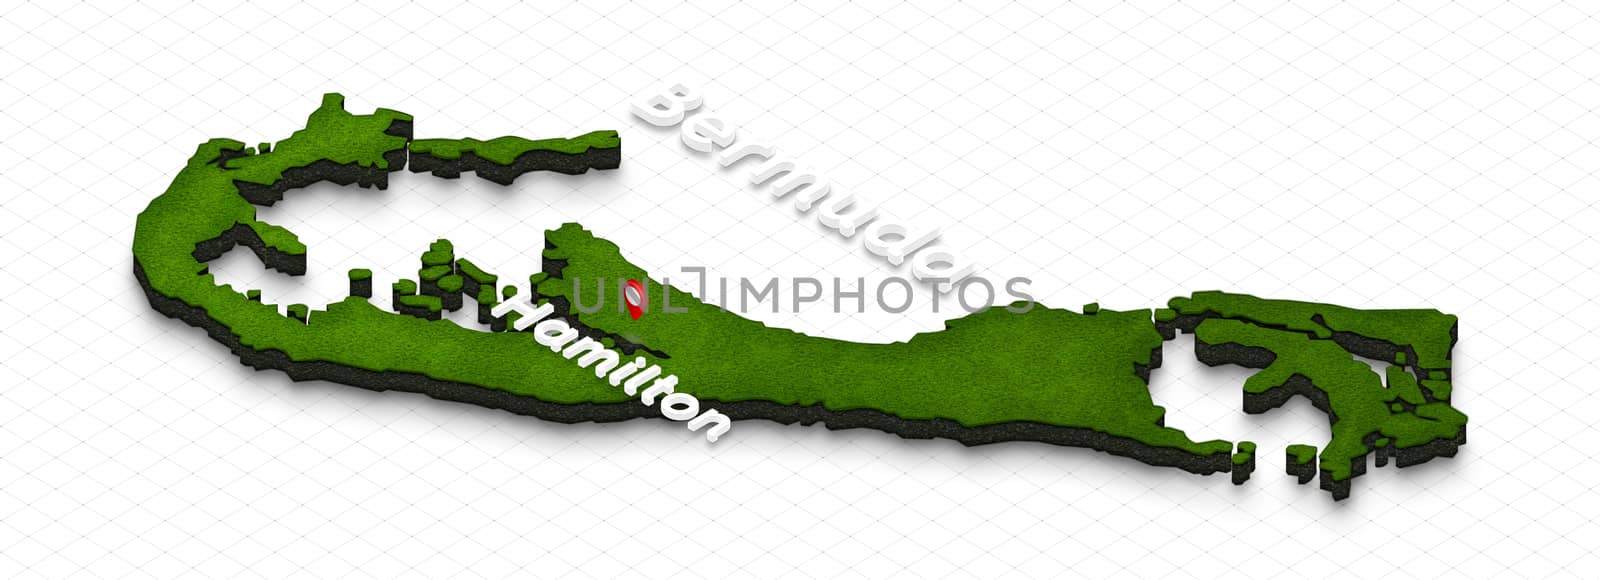 Illustration of a green ground map of Bermuda on grid background. Left 3D isometric perspective projection with the name of country and capital Hamilton.